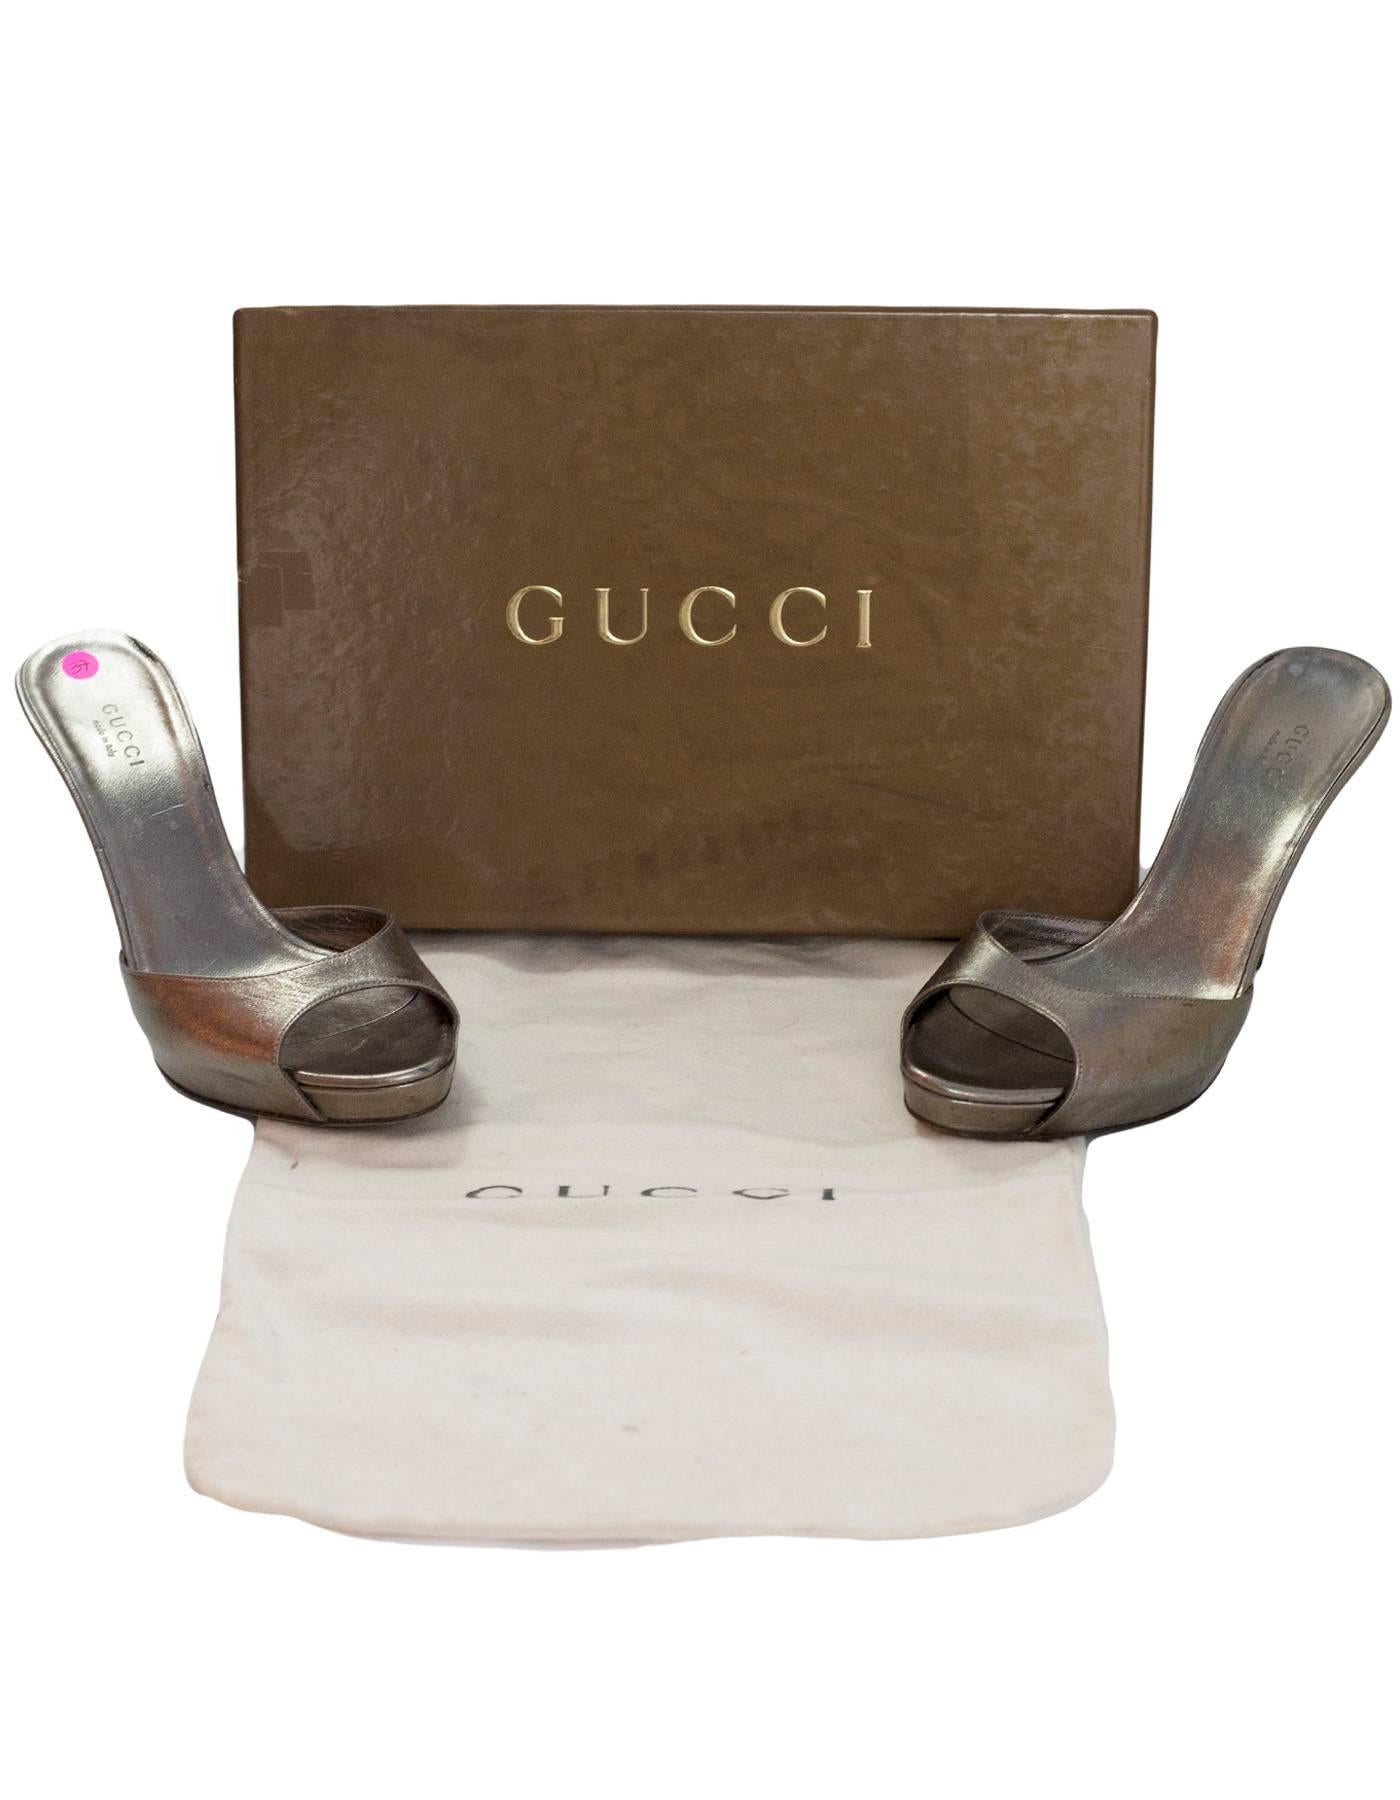 Gucci Pewter Leather Open-Toe Mules Sz 37 3